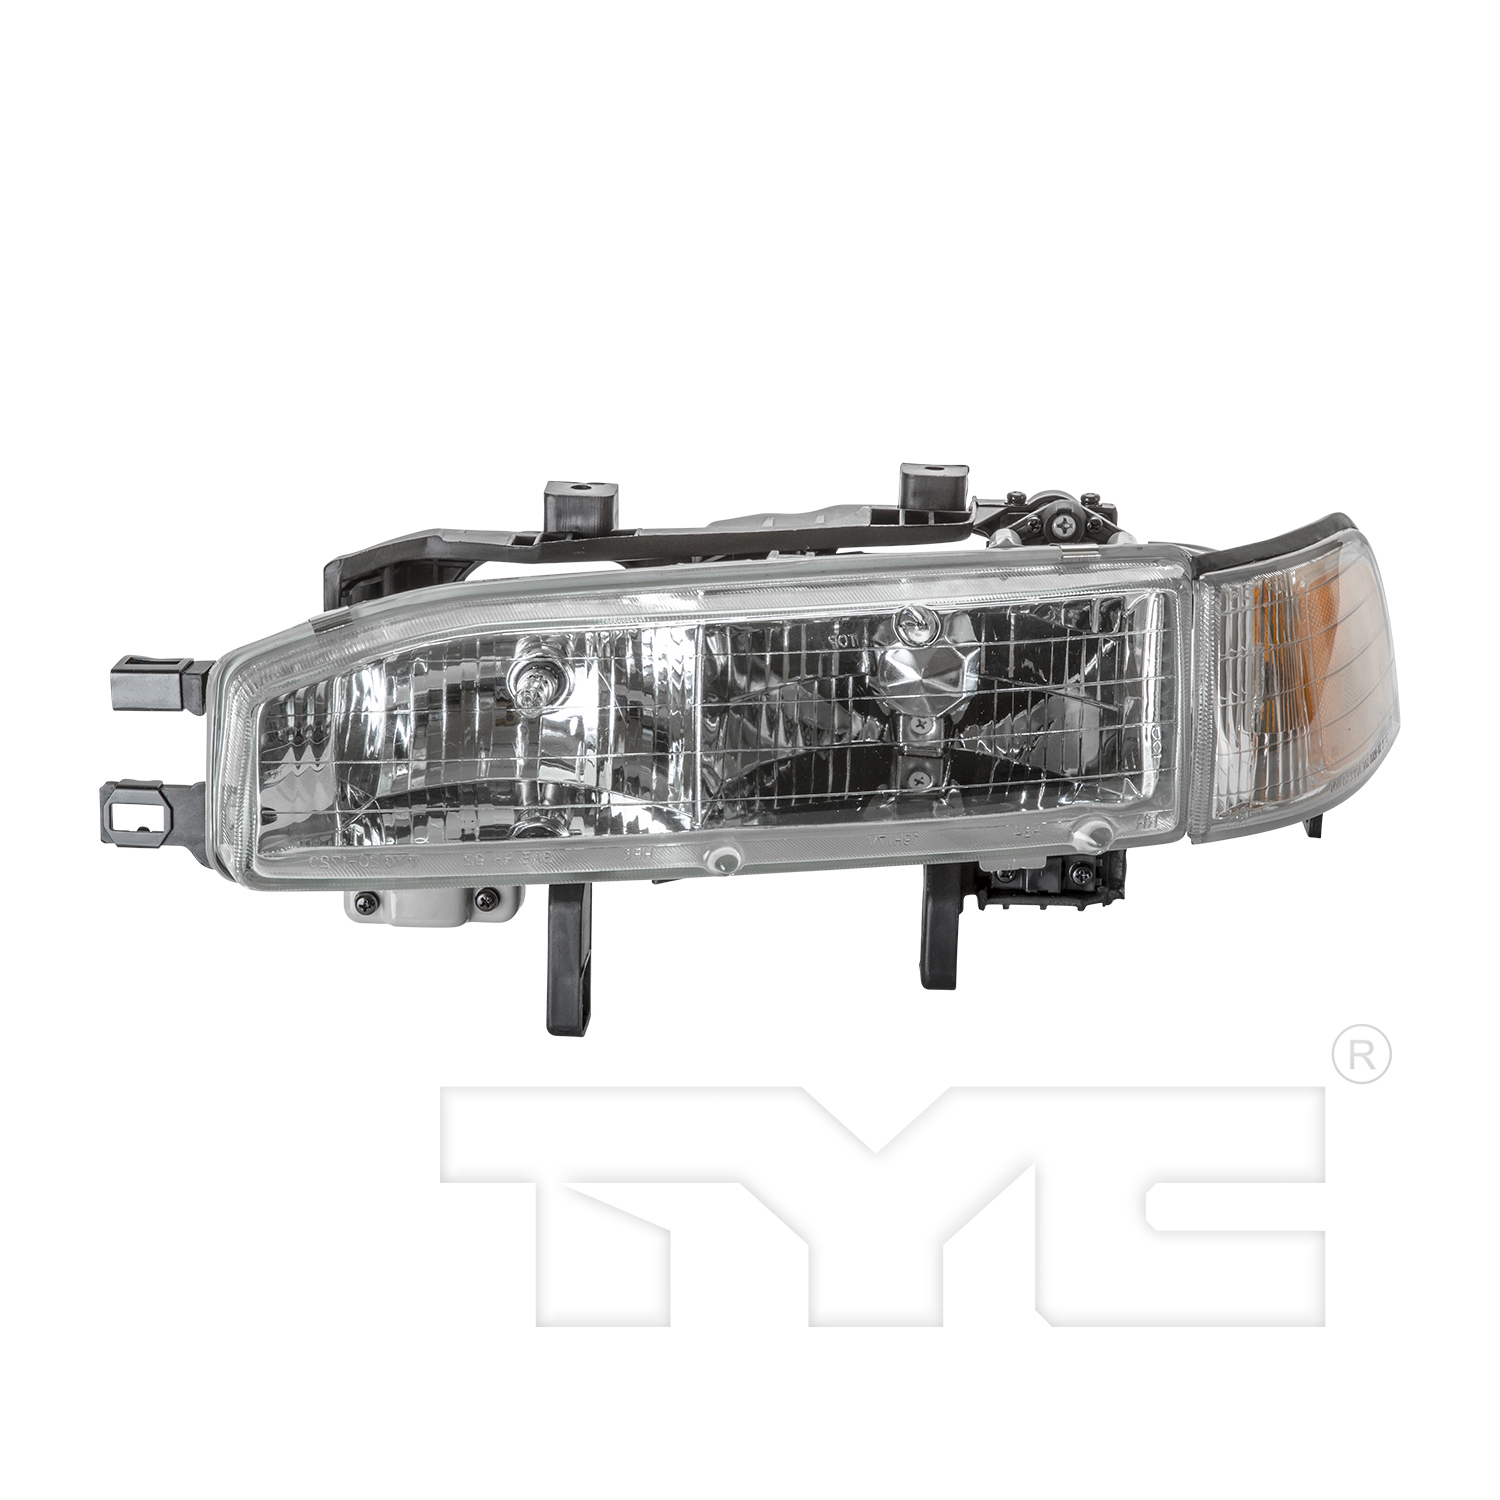 Aftermarket HEADLIGHTS for HONDA - ACCORD, ACCORD,92-93,LT Headlamp assy composite